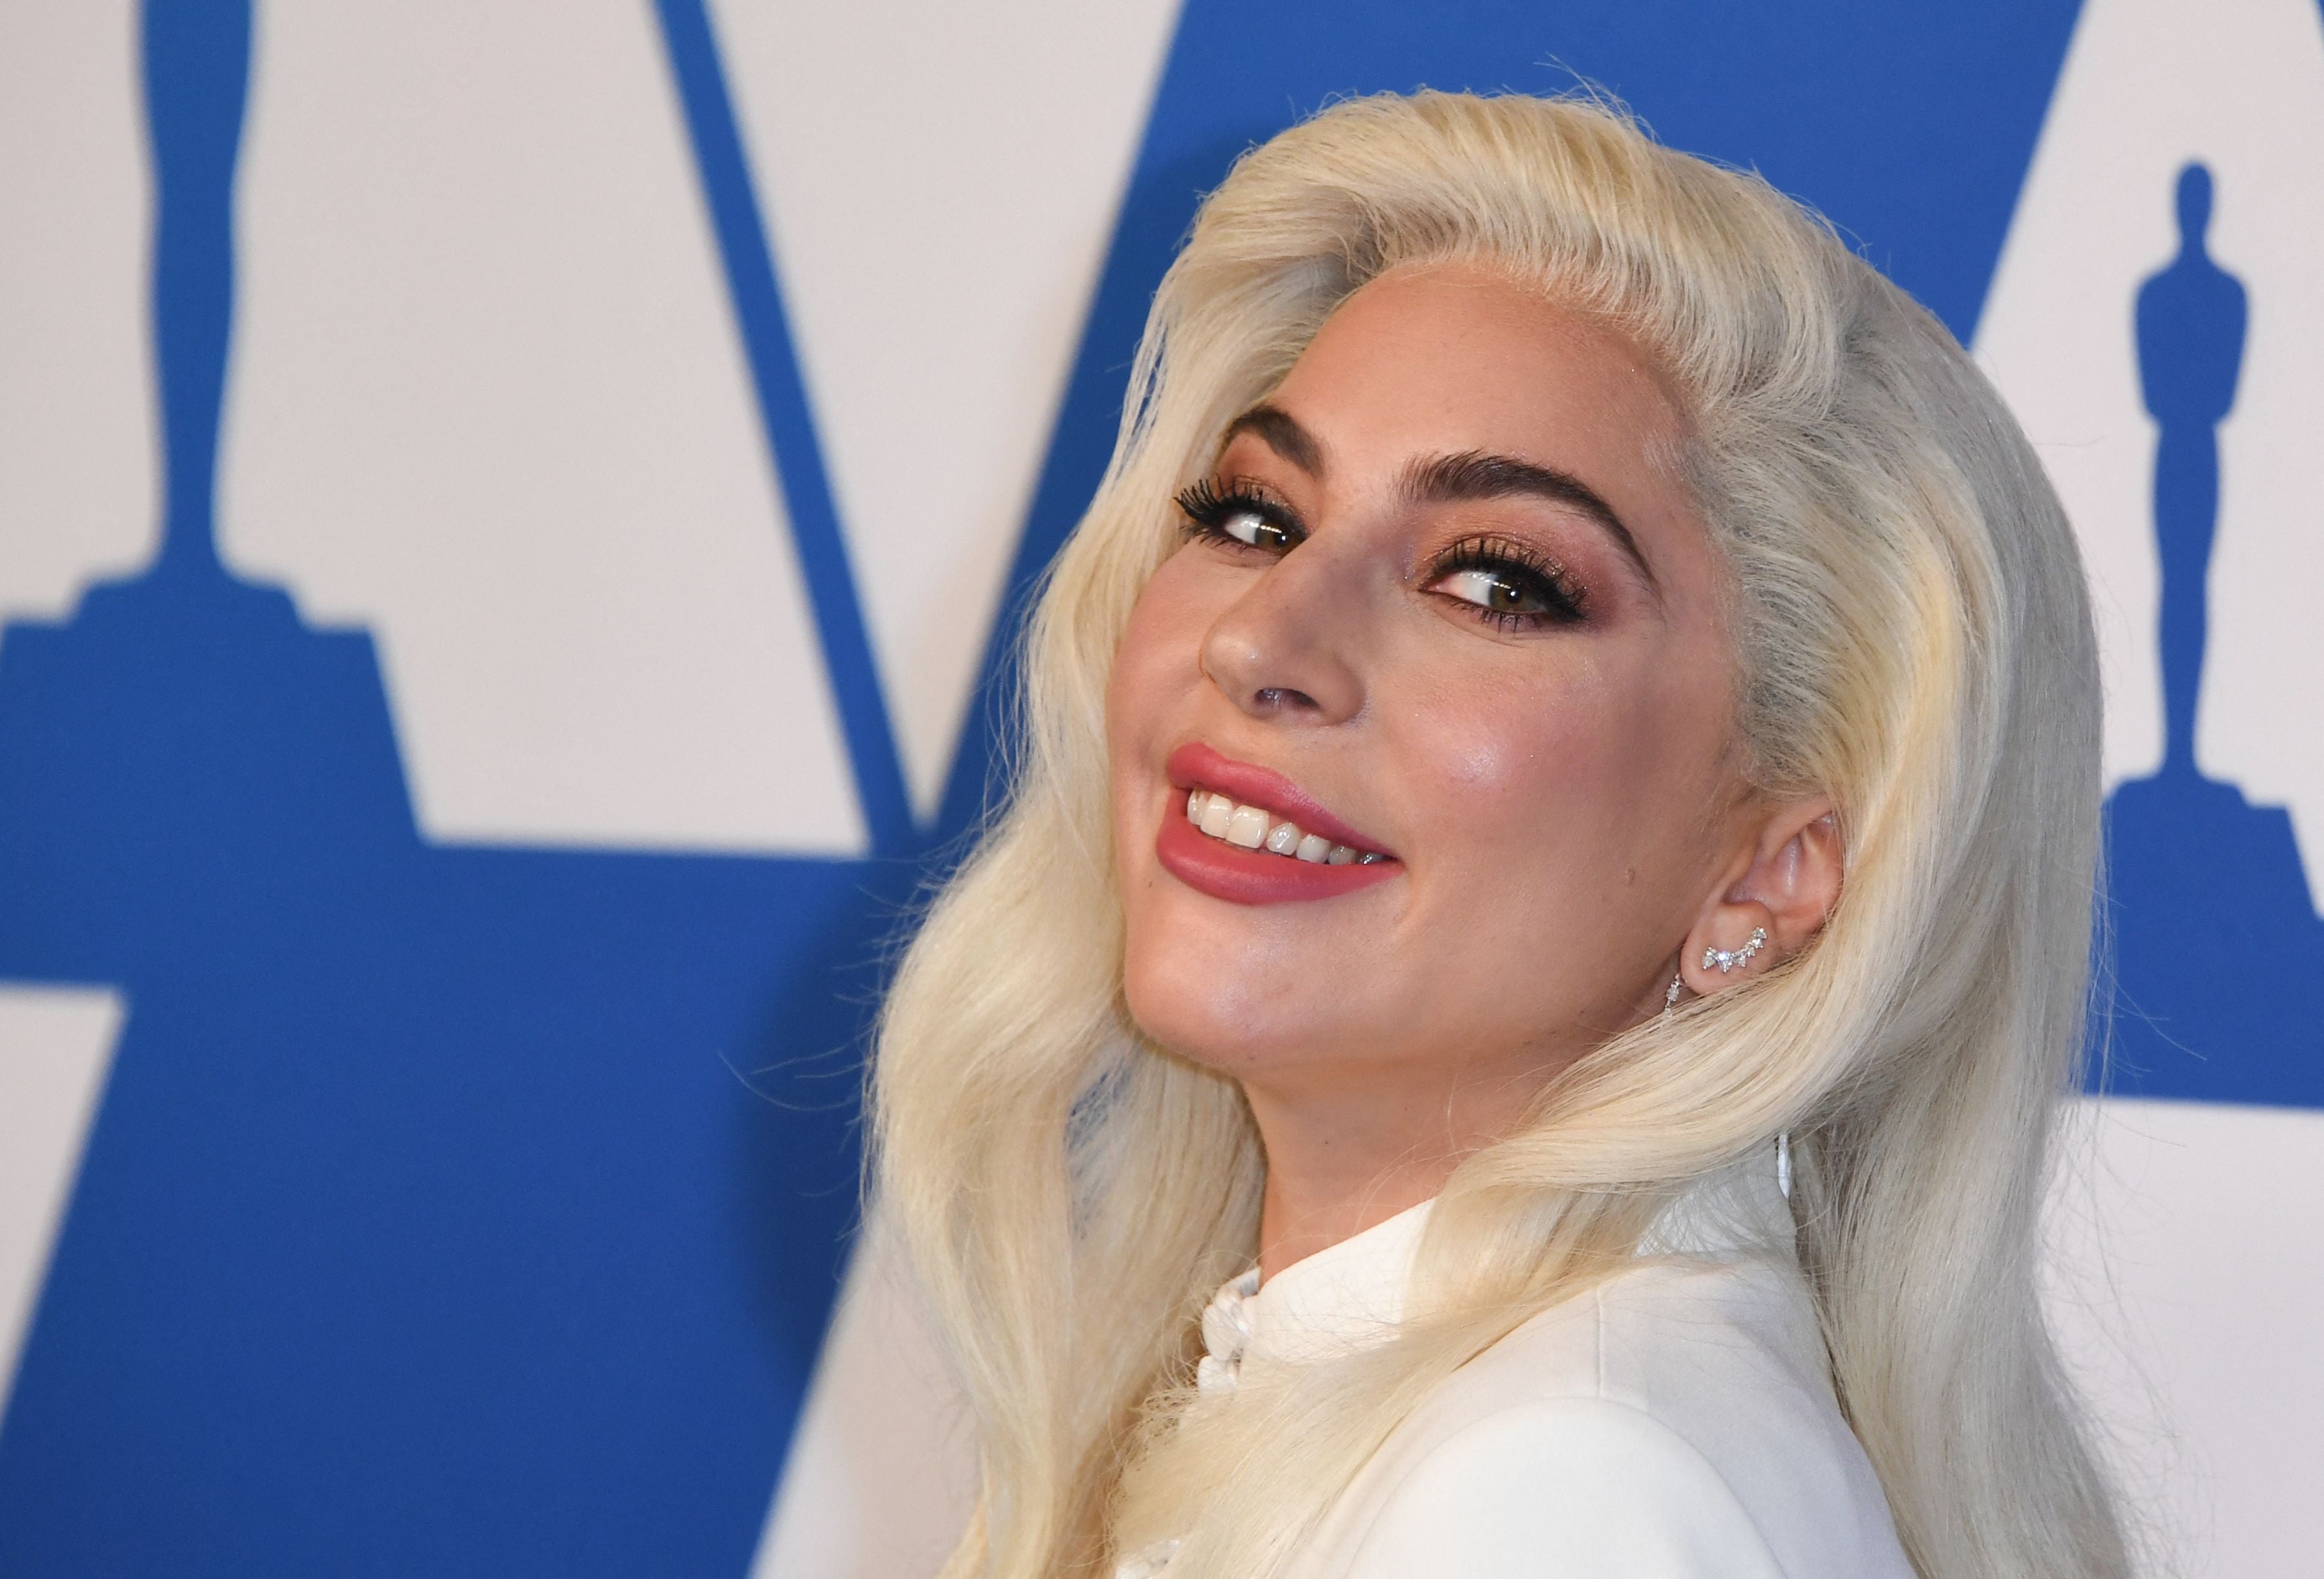 Lady Gaga’s One World: Together at Home raised over £28m